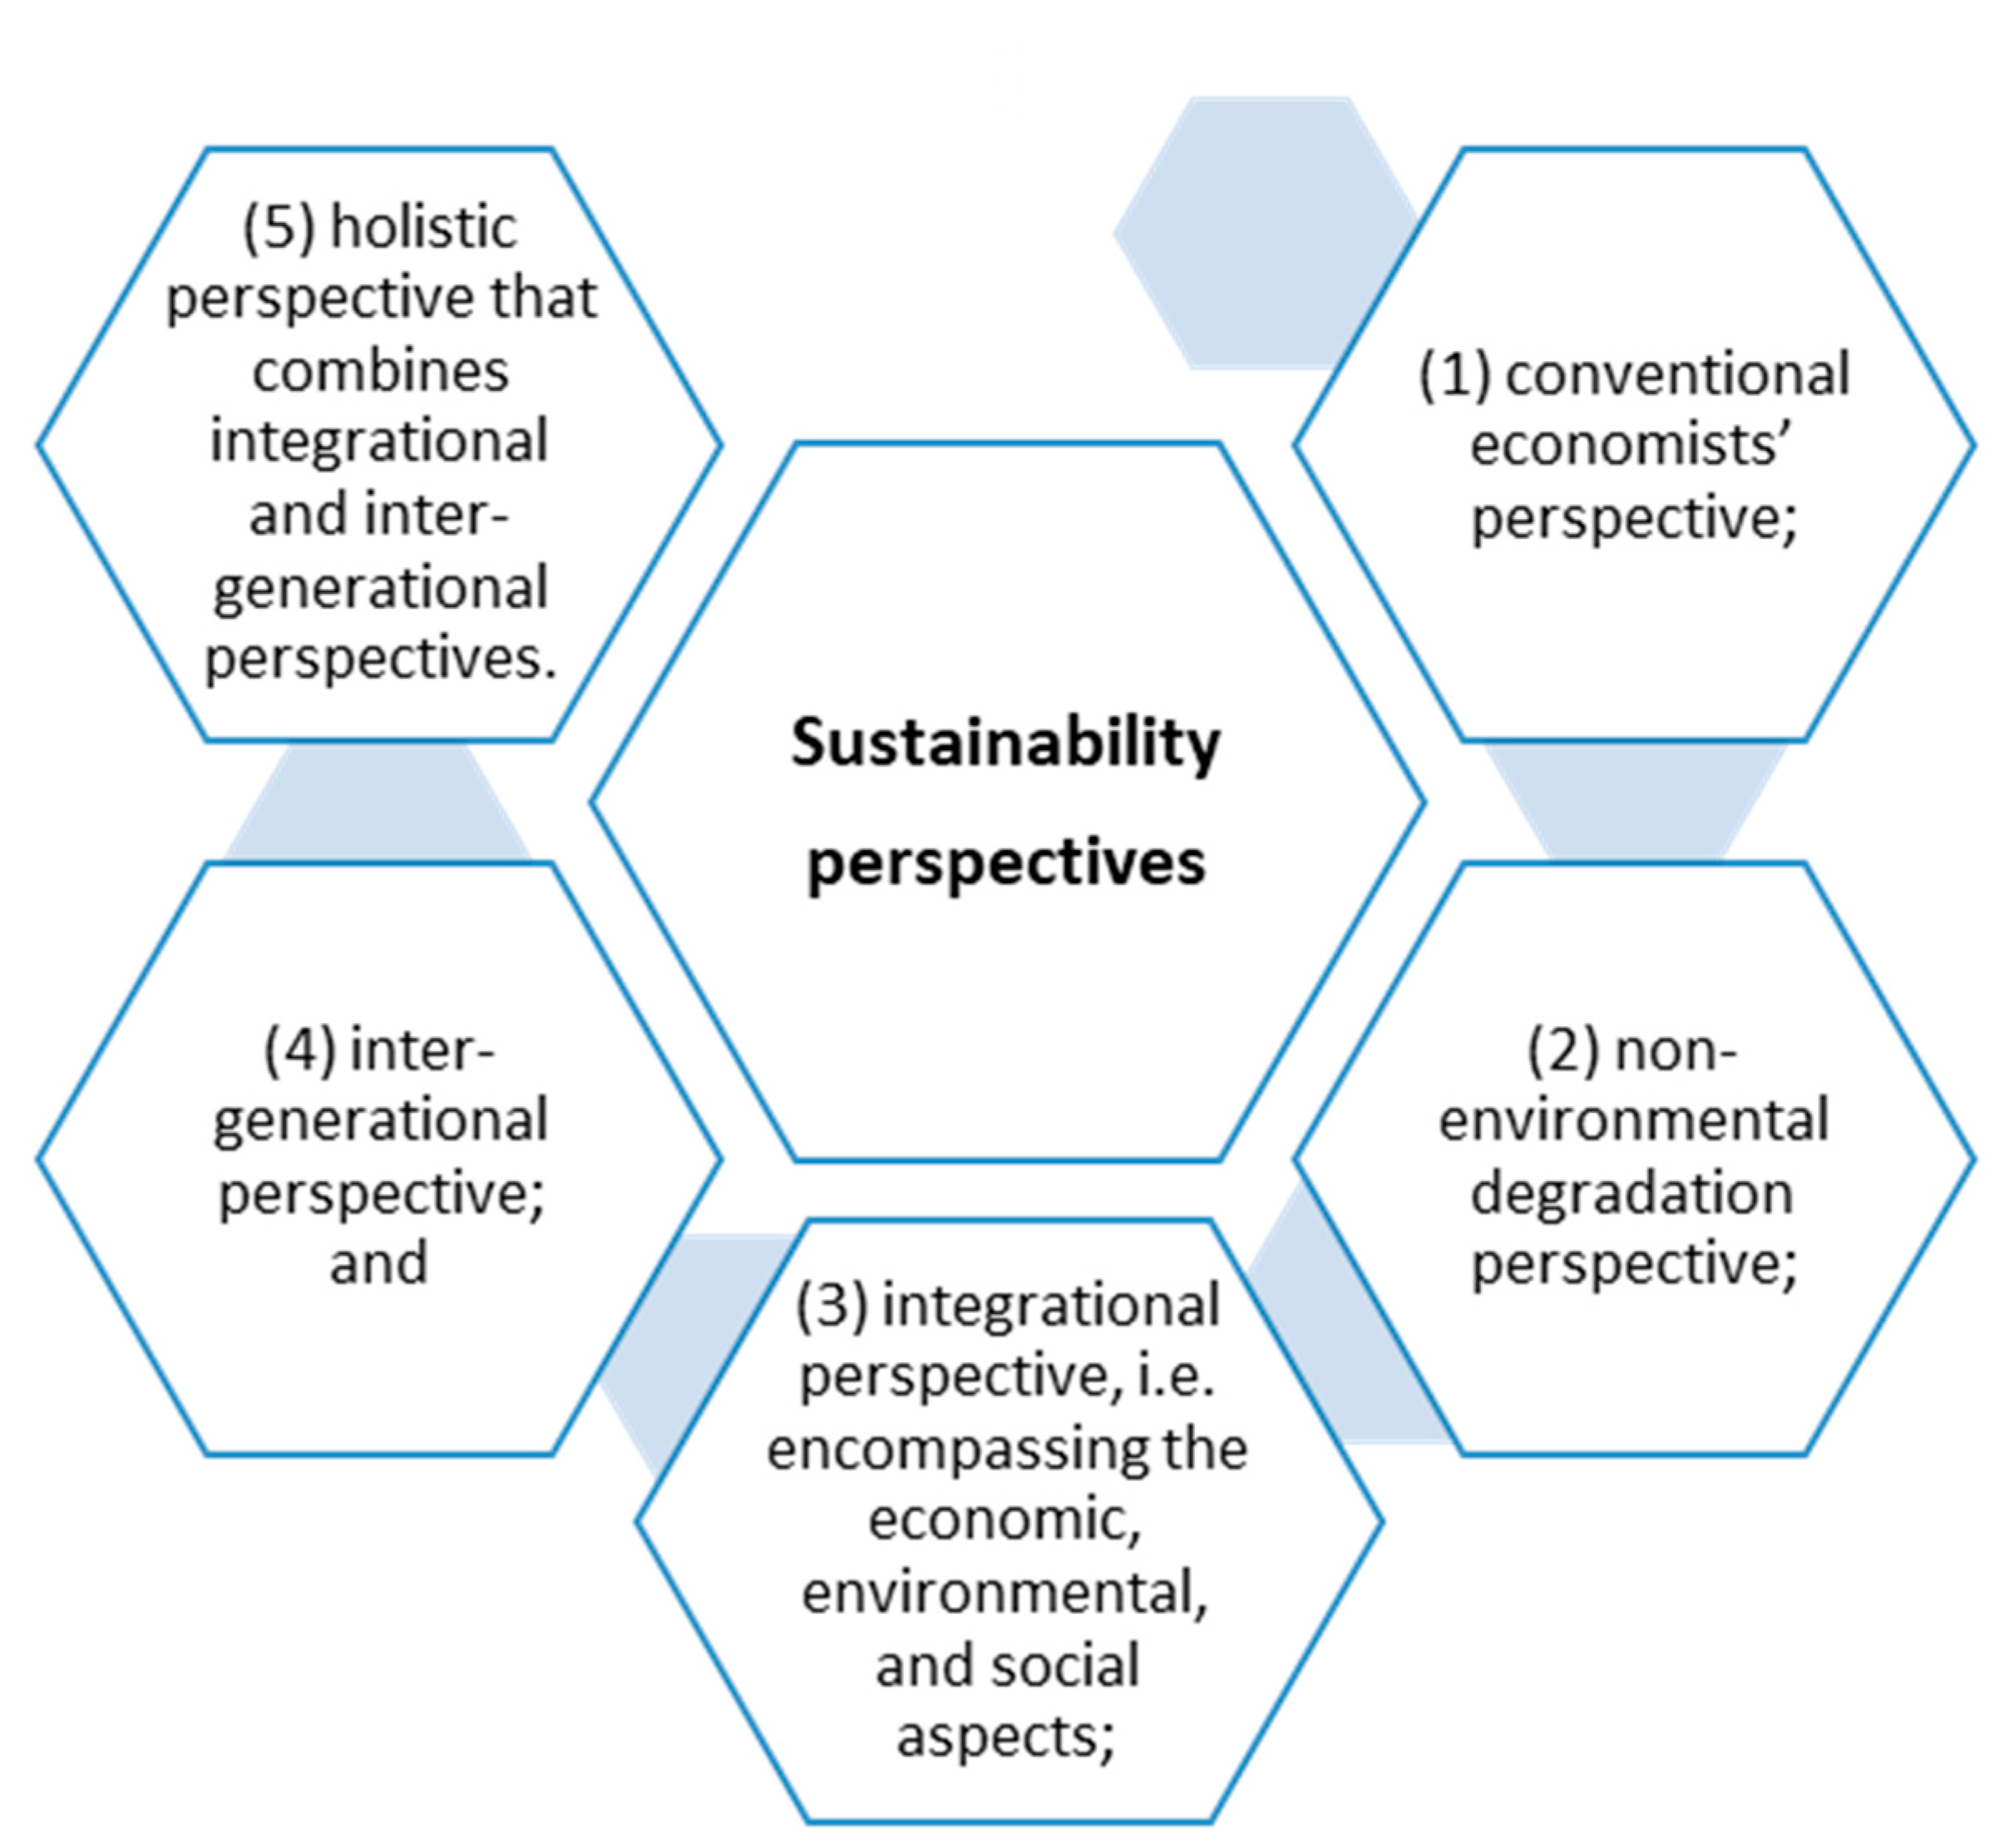 science and technology for sustainable development essay